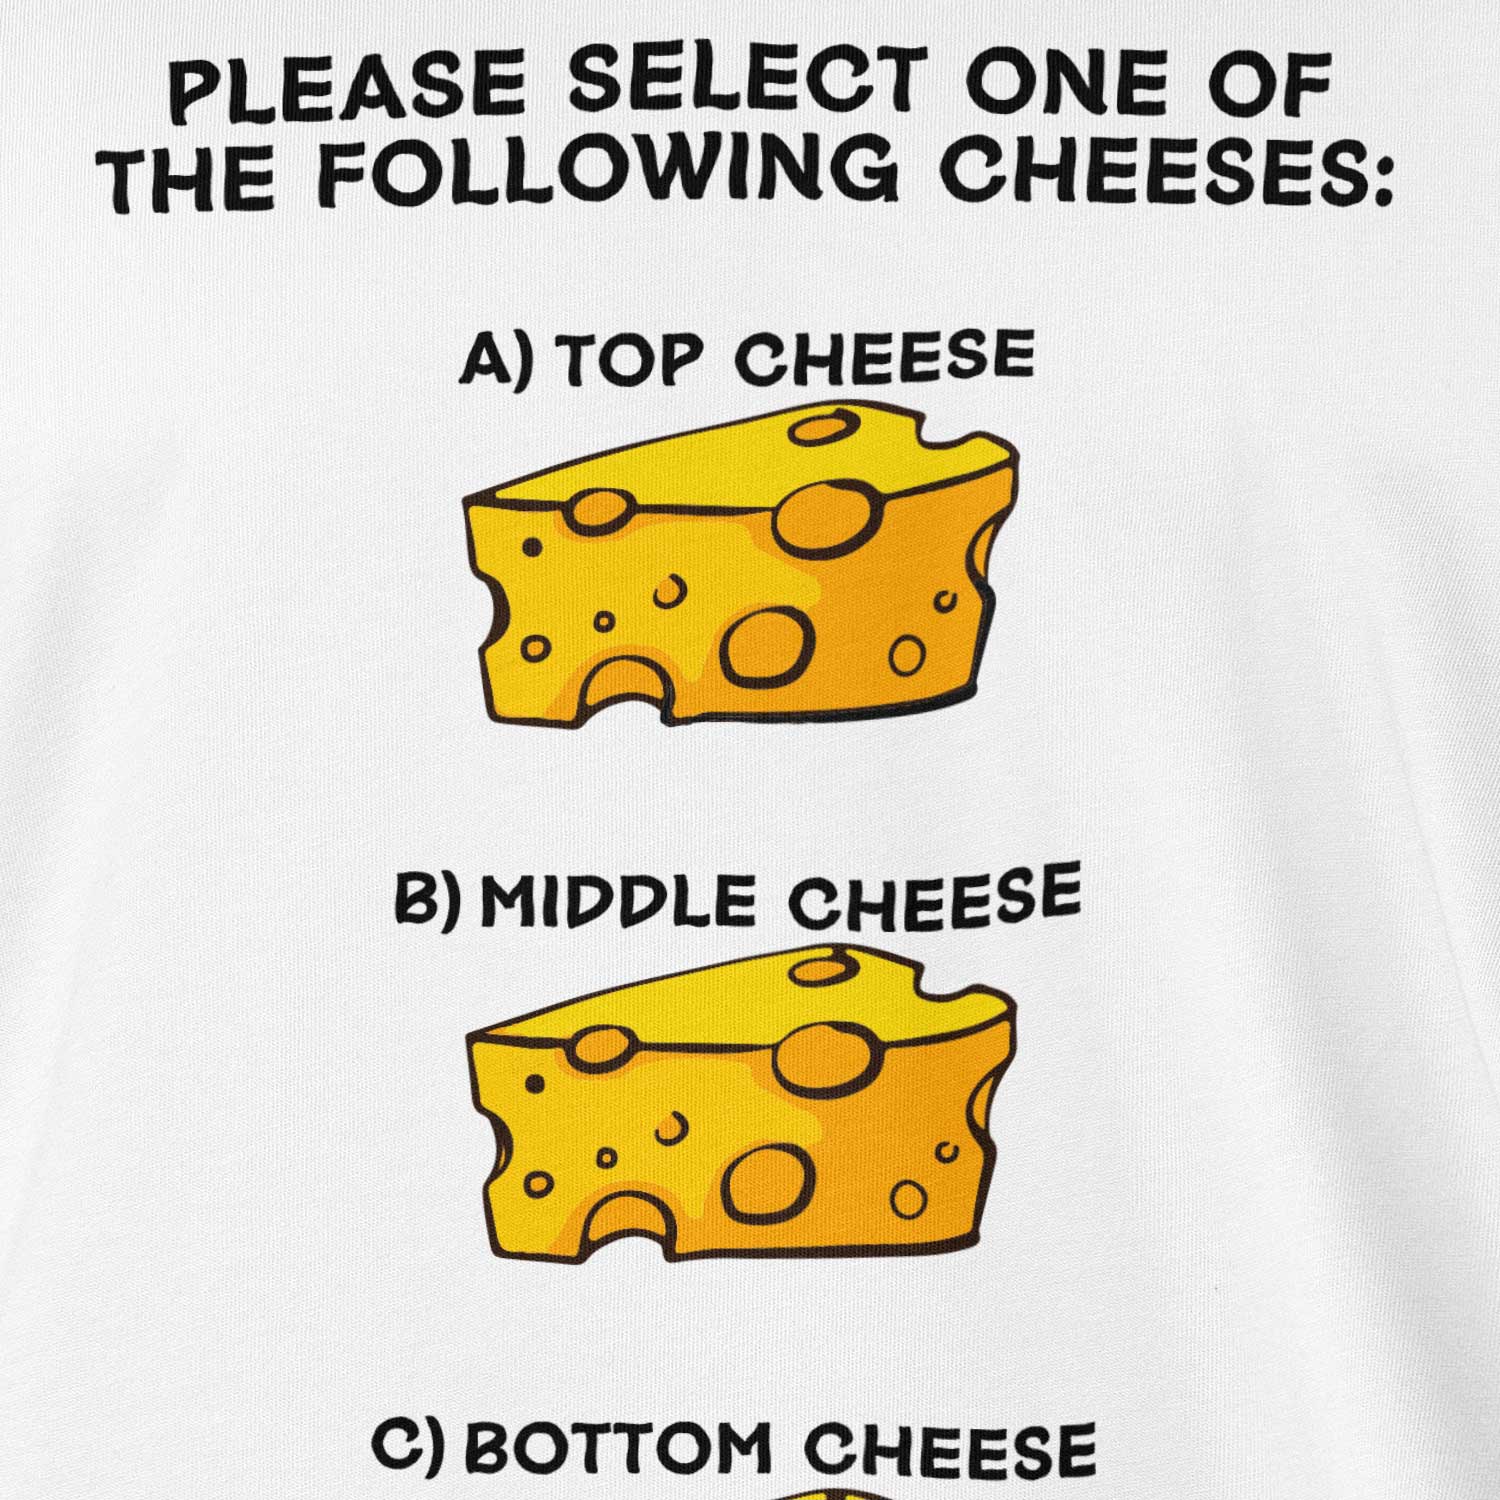 TOP CHEESE